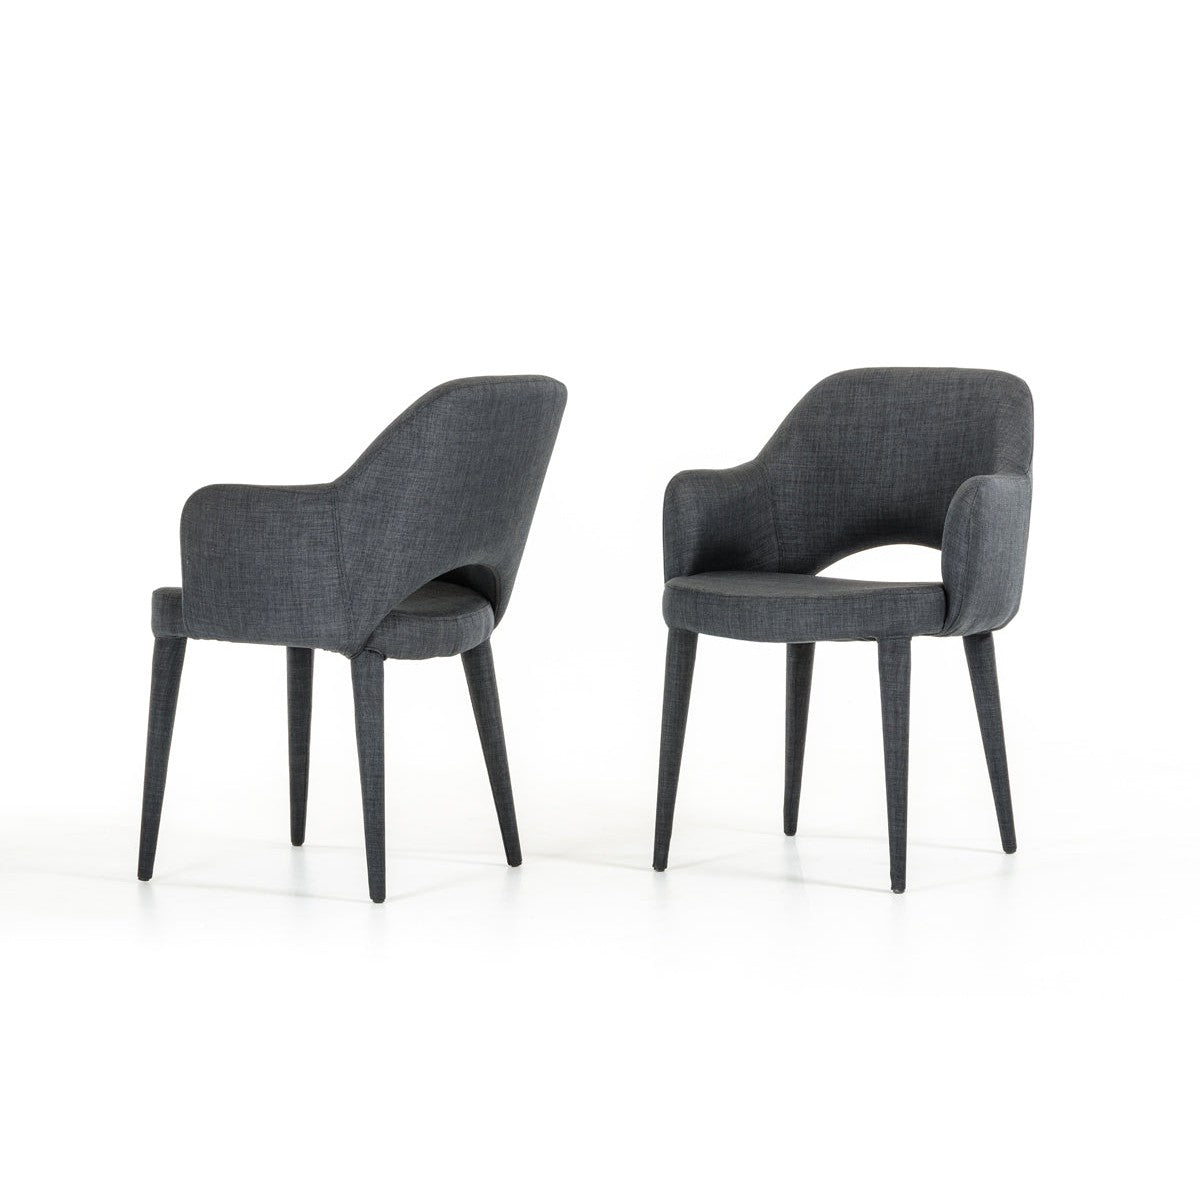 HomeRoots 34" Fabric And Metal Dining Chair In Dark Grey